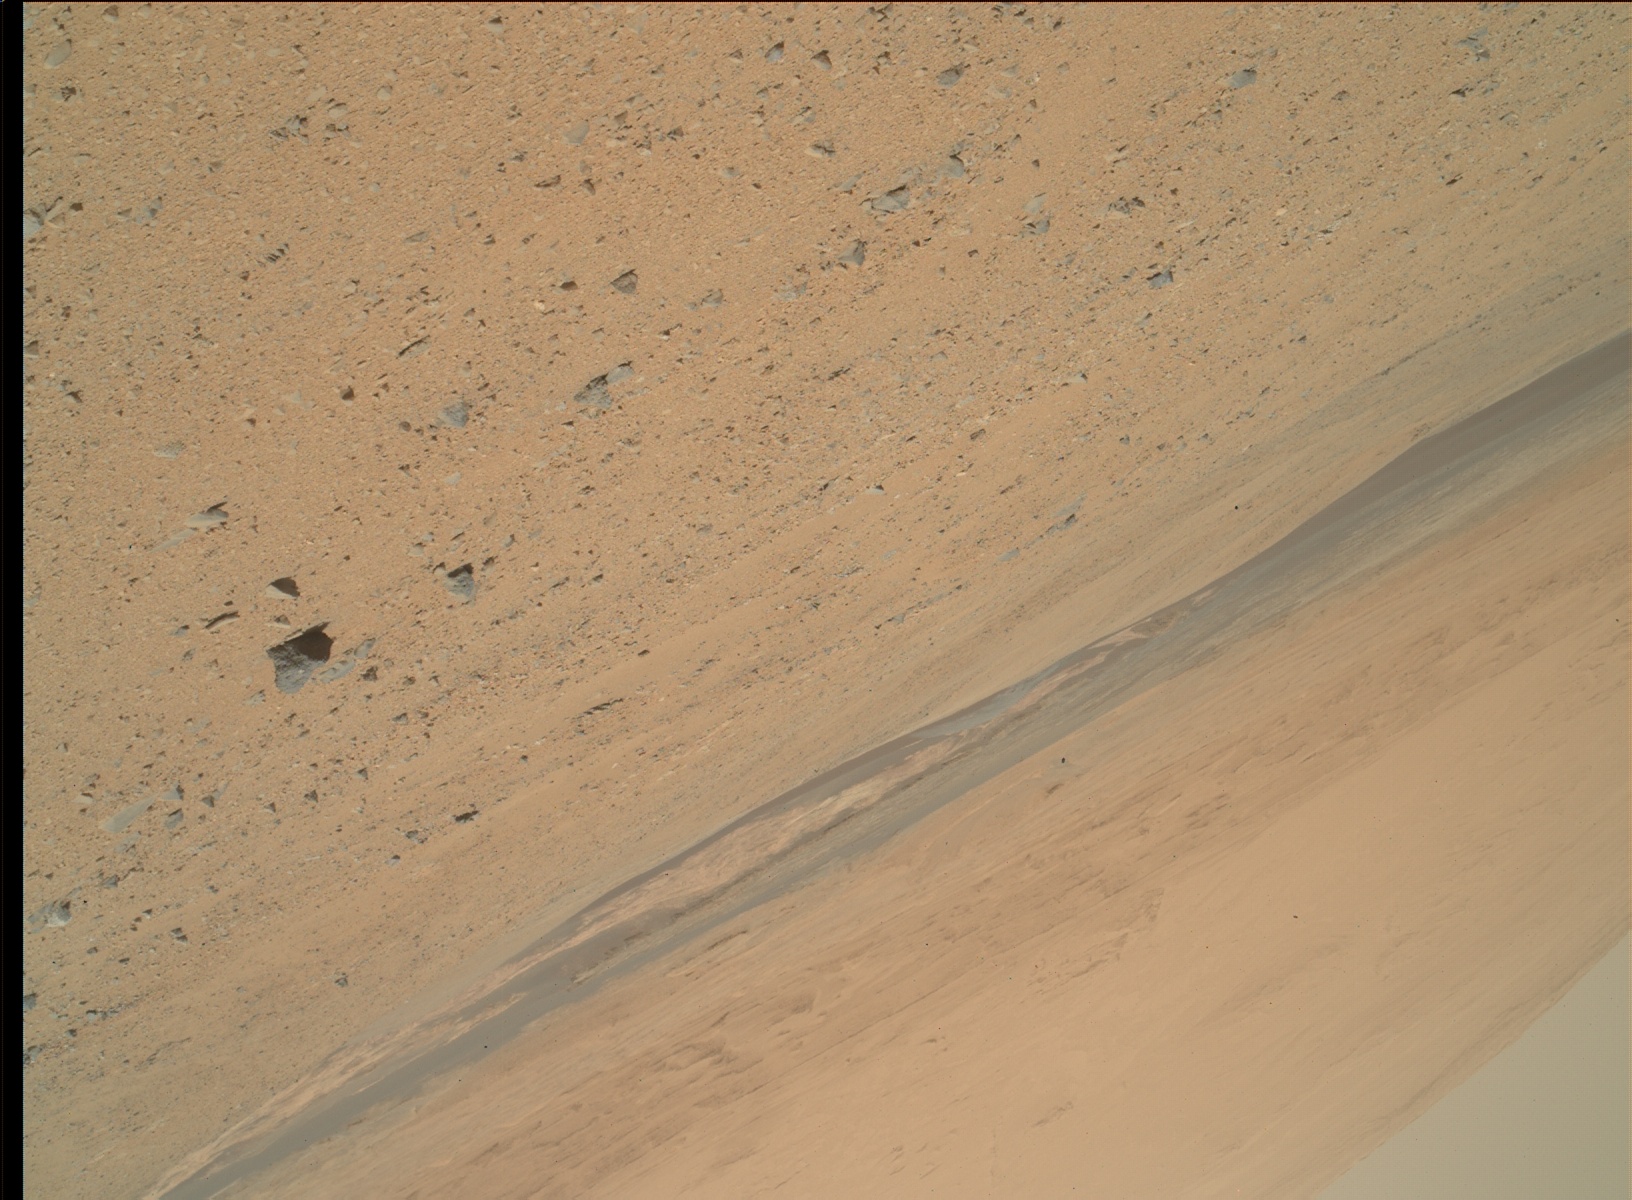 Nasa's Mars rover Curiosity acquired this image using its Mars Hand Lens Imager (MAHLI) on Sol 337